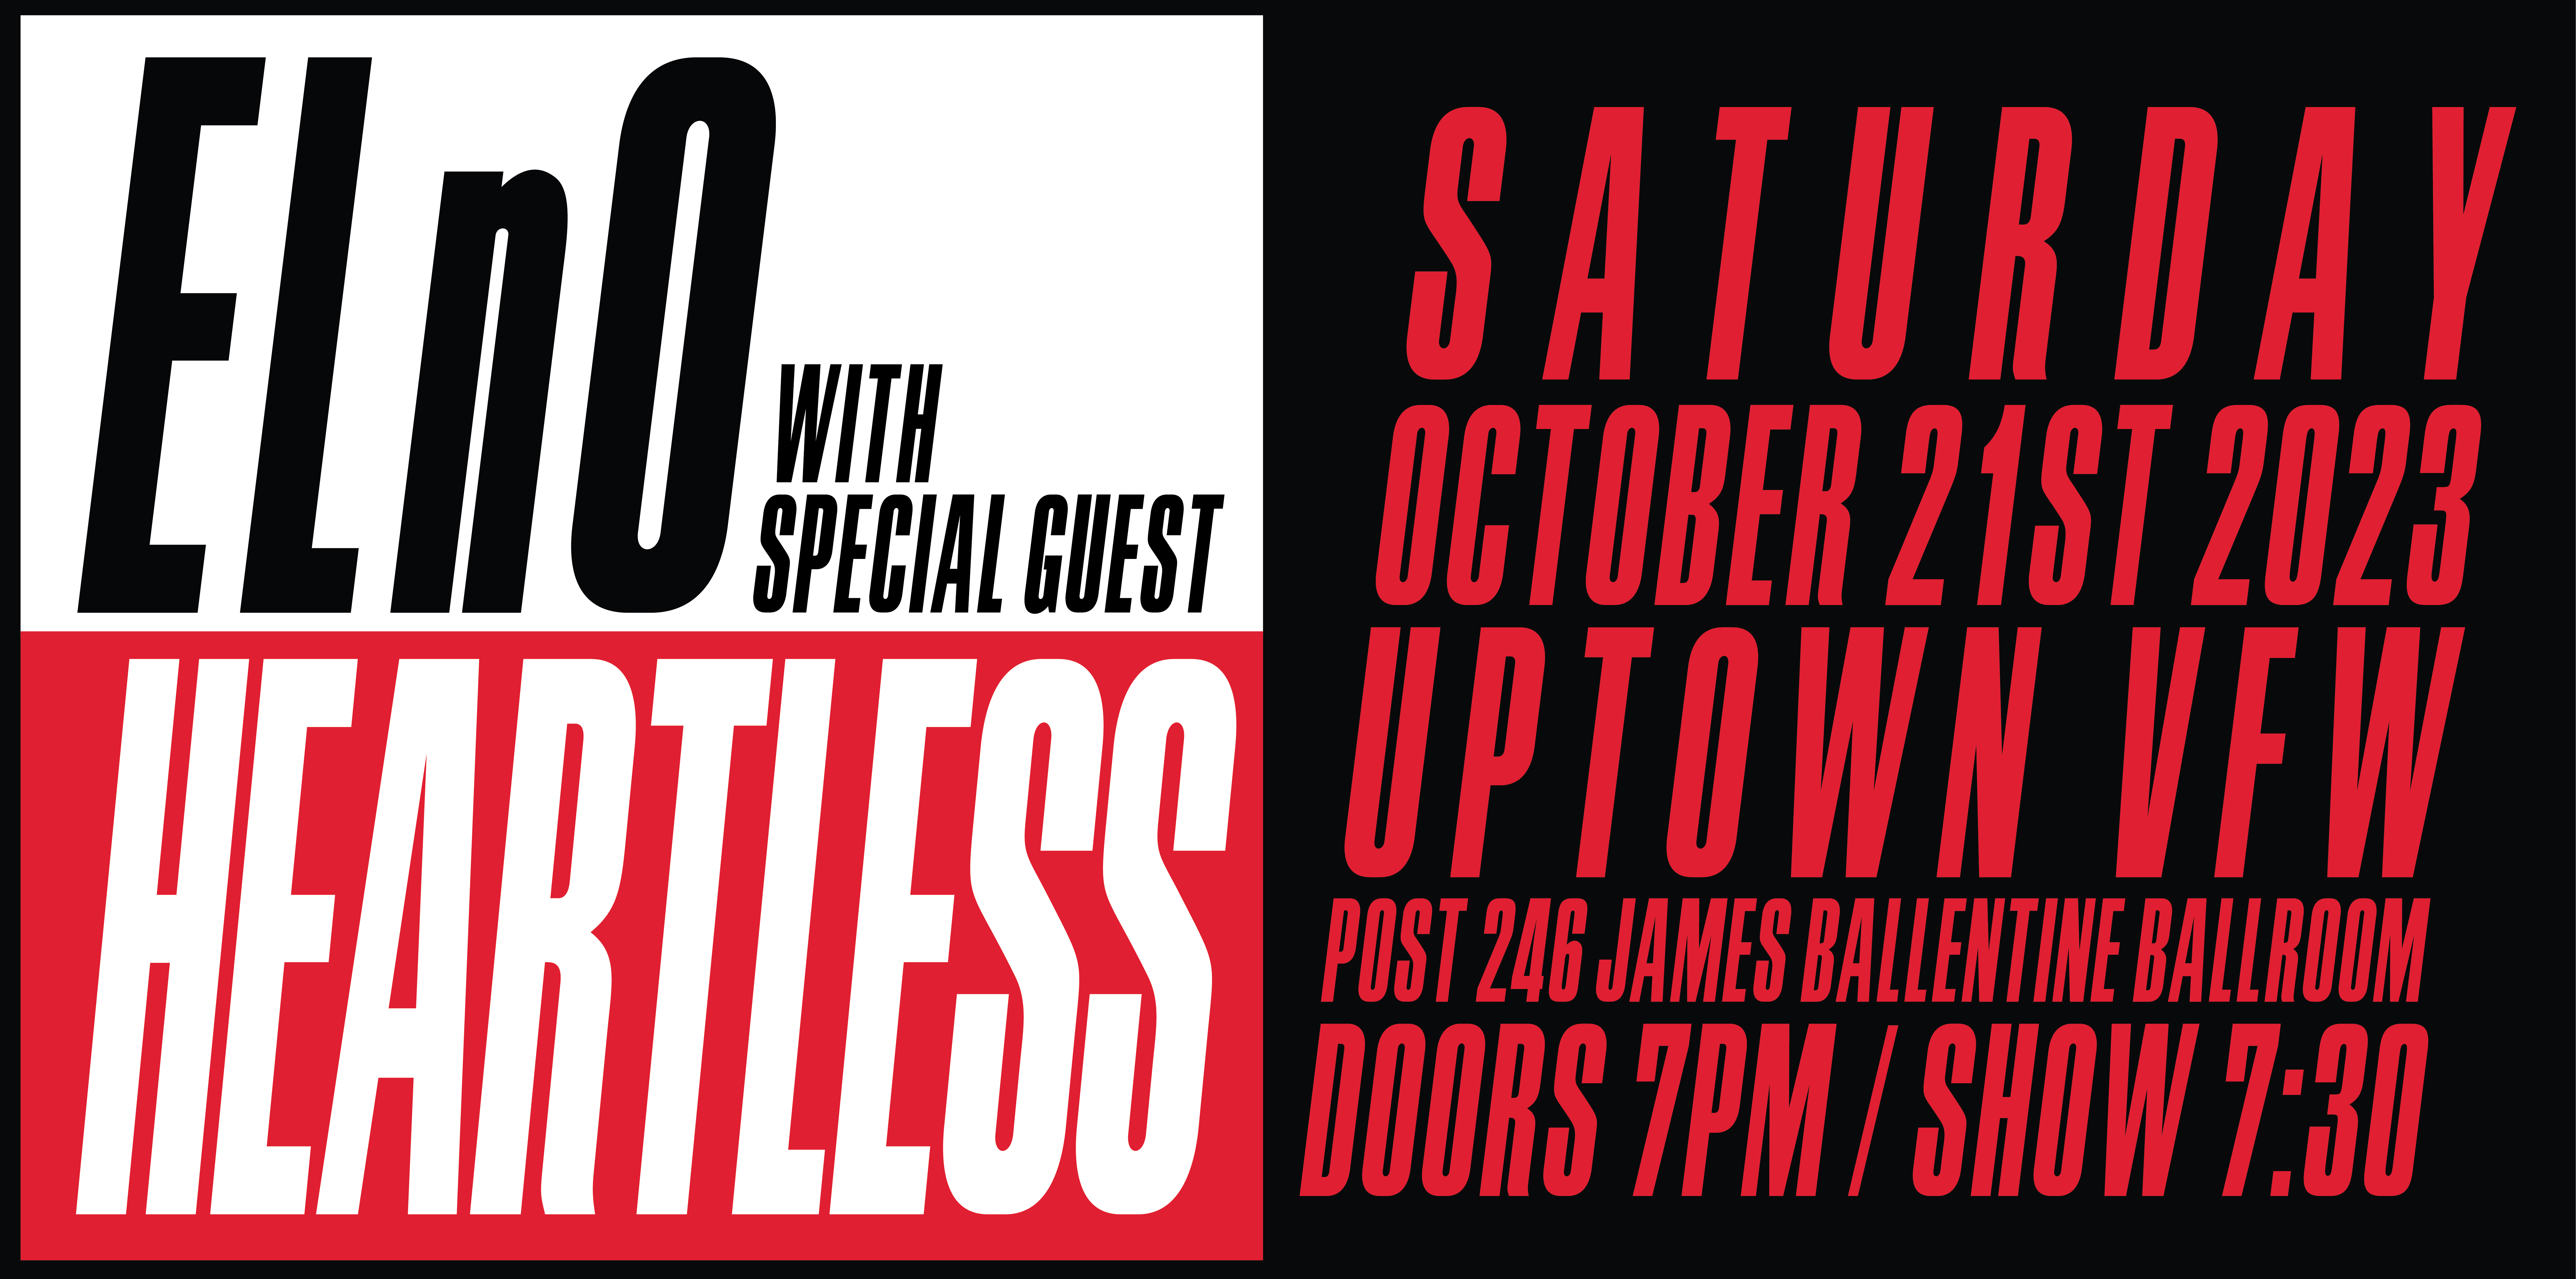 ELnO with special guest Heartless Saturday October 21 James Ballentine "Uptown" VFW Post 246 Doors 7:00pm :: Music 7:30pm :: 21+ GA $25 ADV / $30 DOS NO REFUNDS Tickets On Sale Now